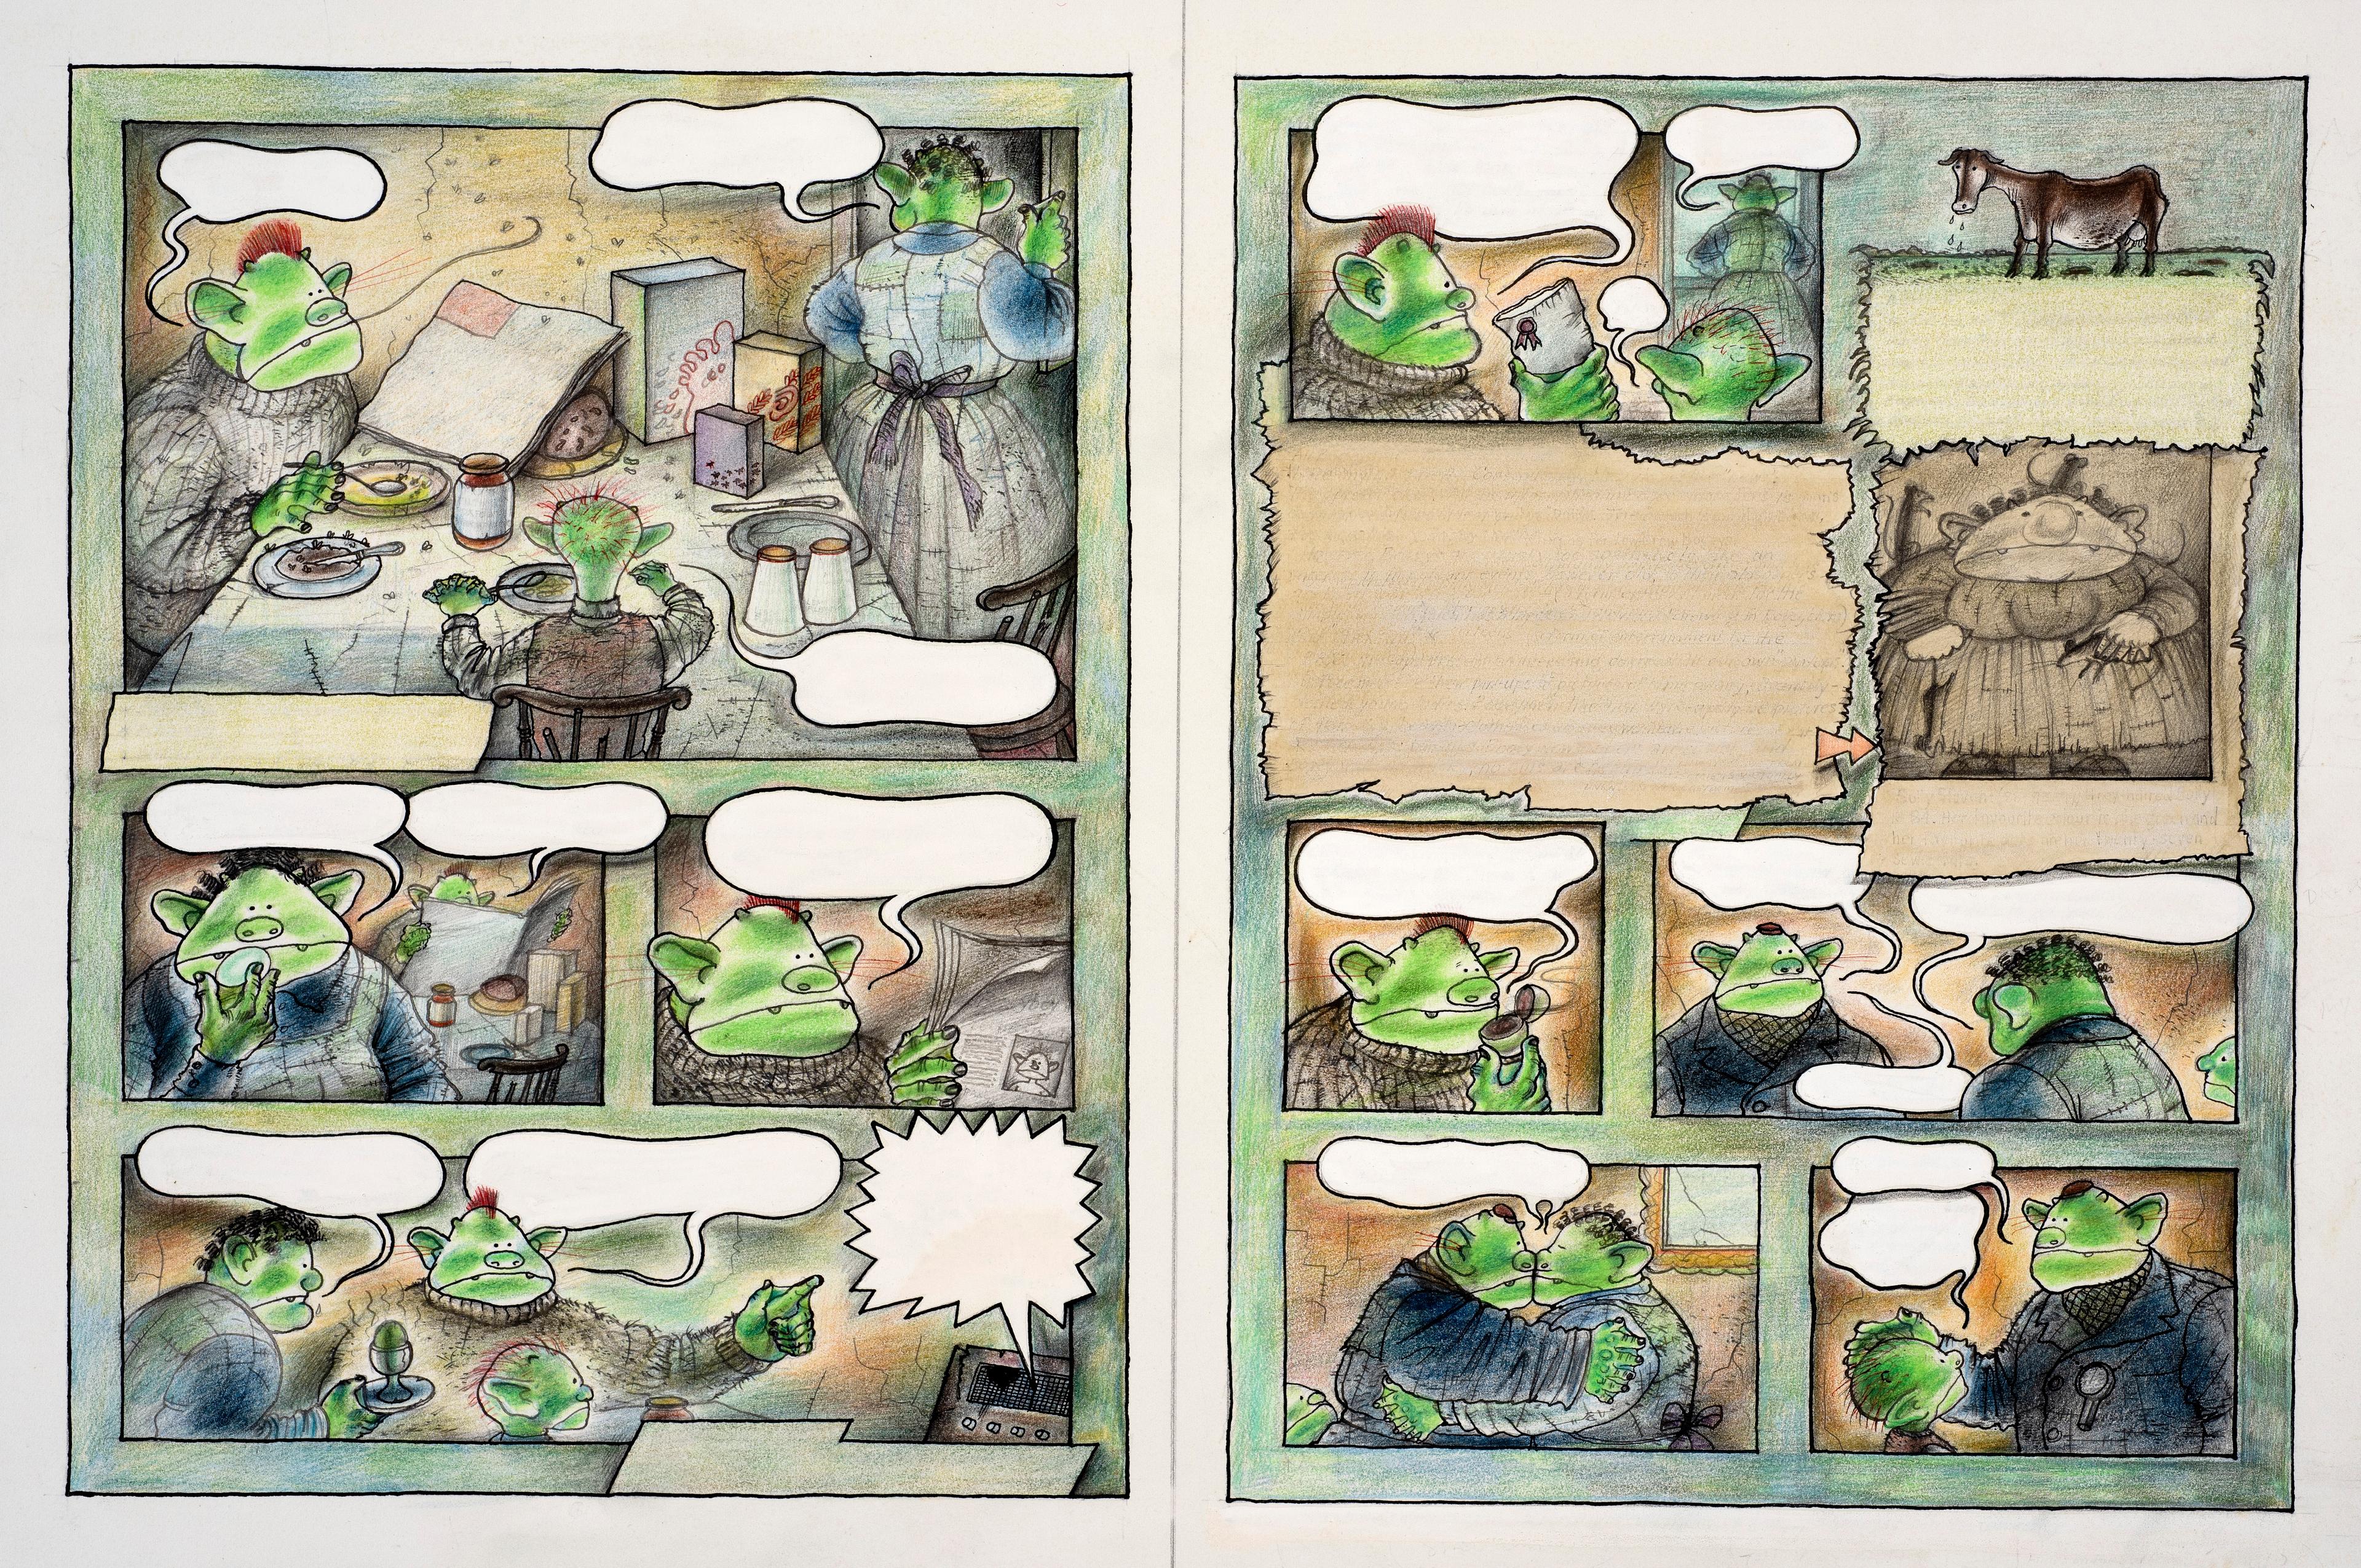 Colour pencil drawing with 12 panels of Bogey family having breakfast